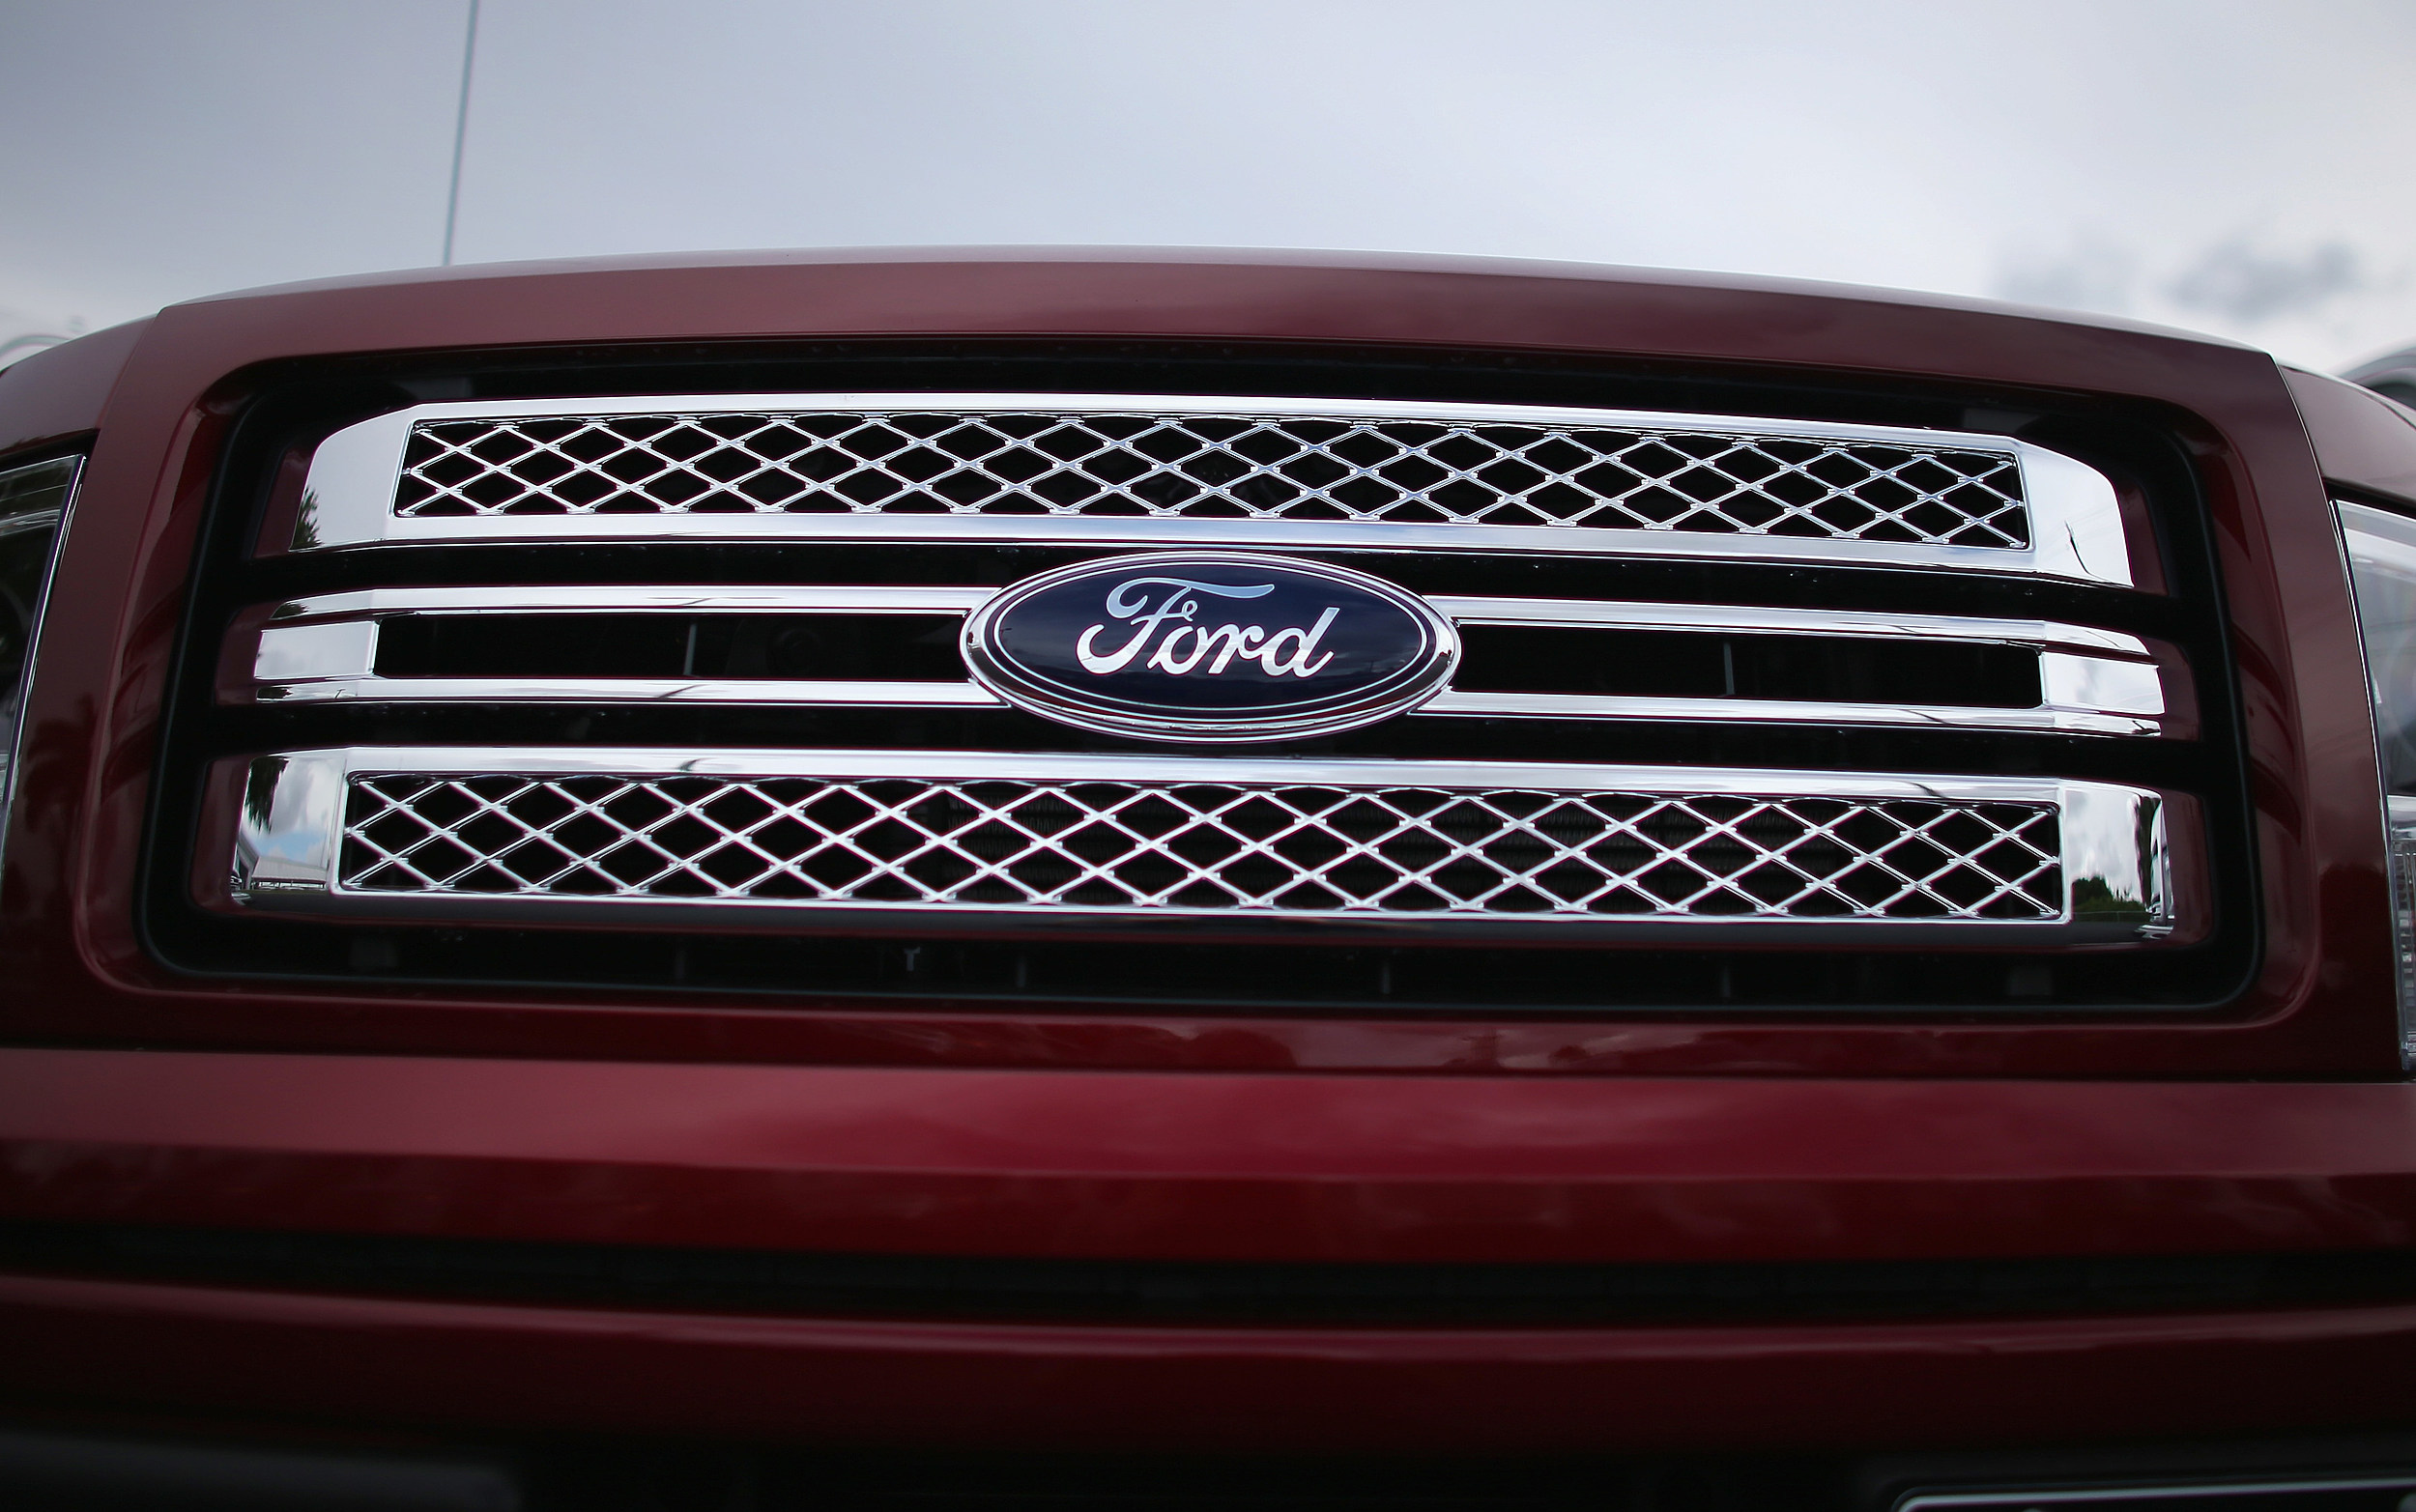 Pick-Up Trucks Drive Ford Sales Up 12 Percent In August